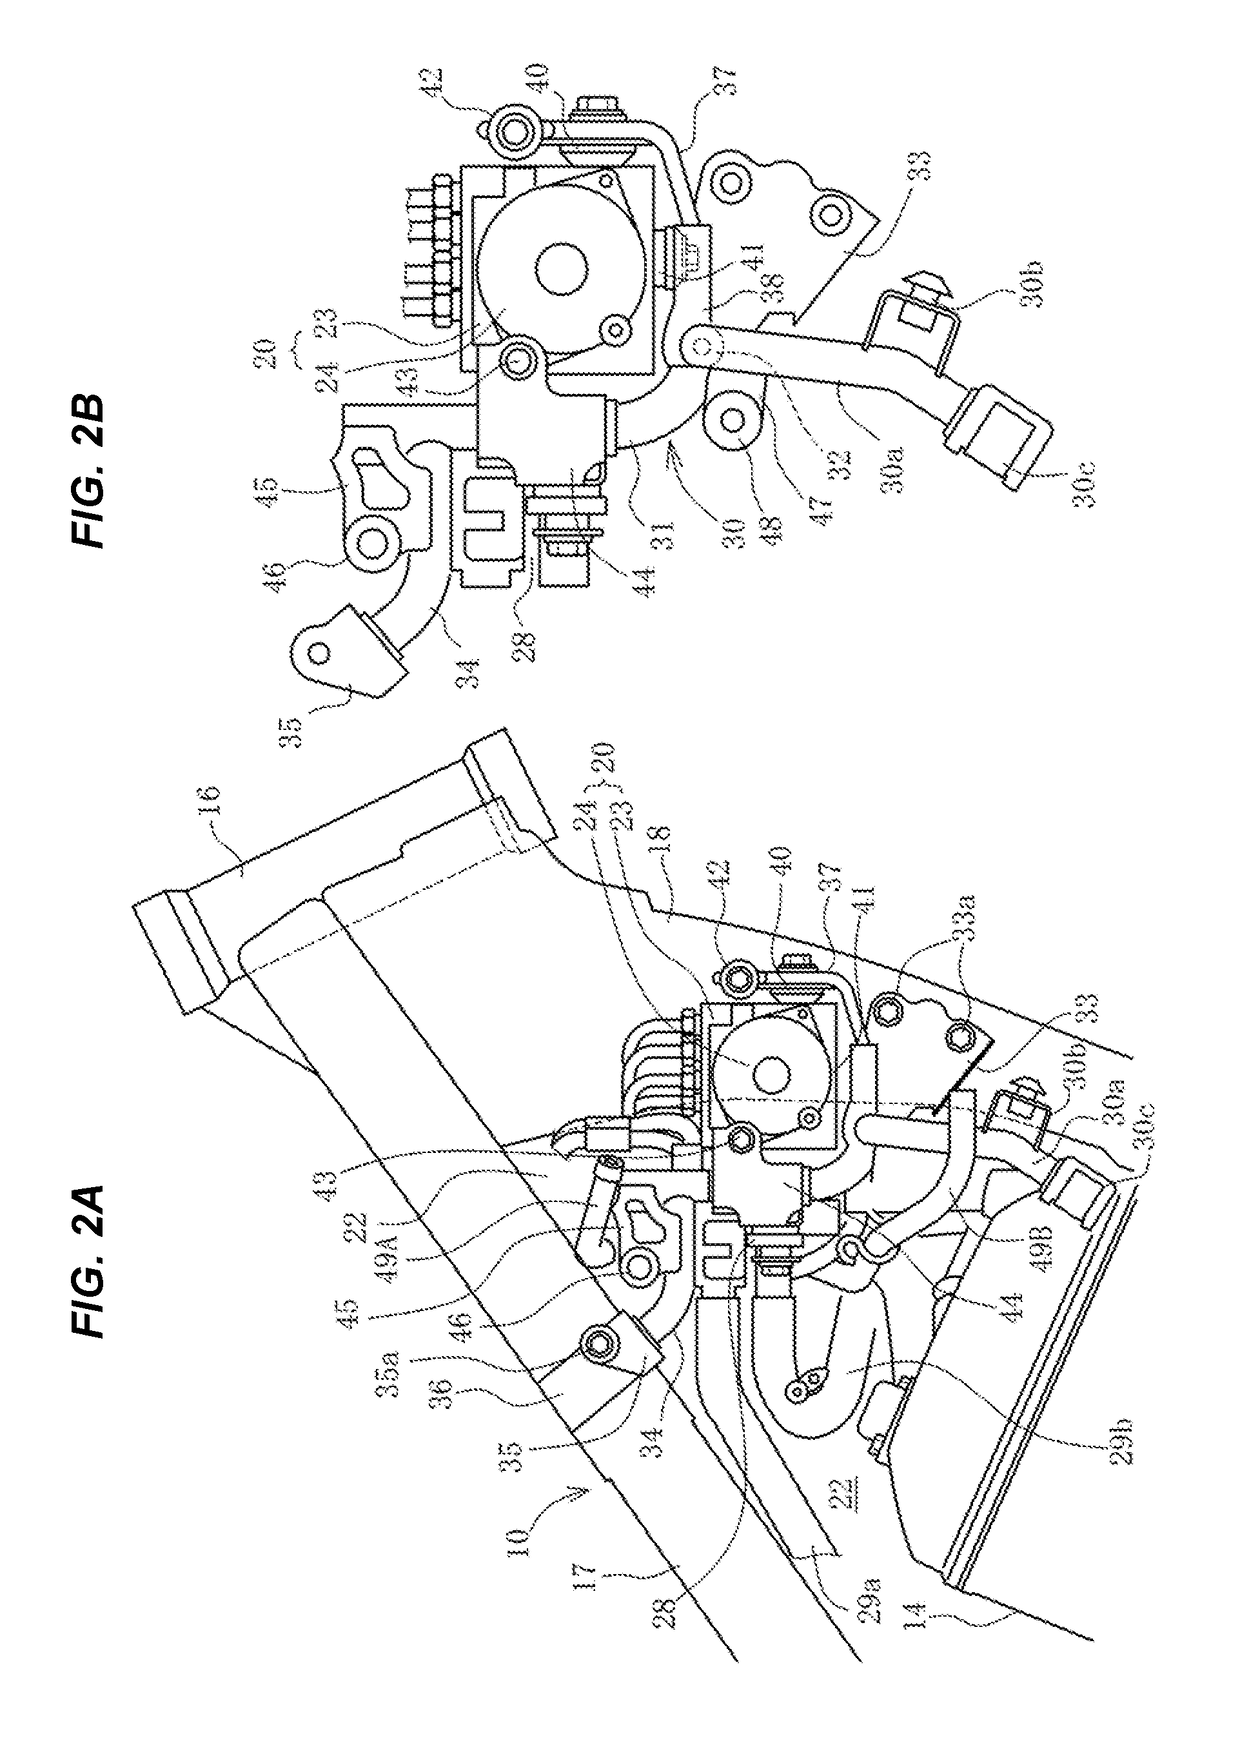 ABS modulator support structure of saddle type vehicle